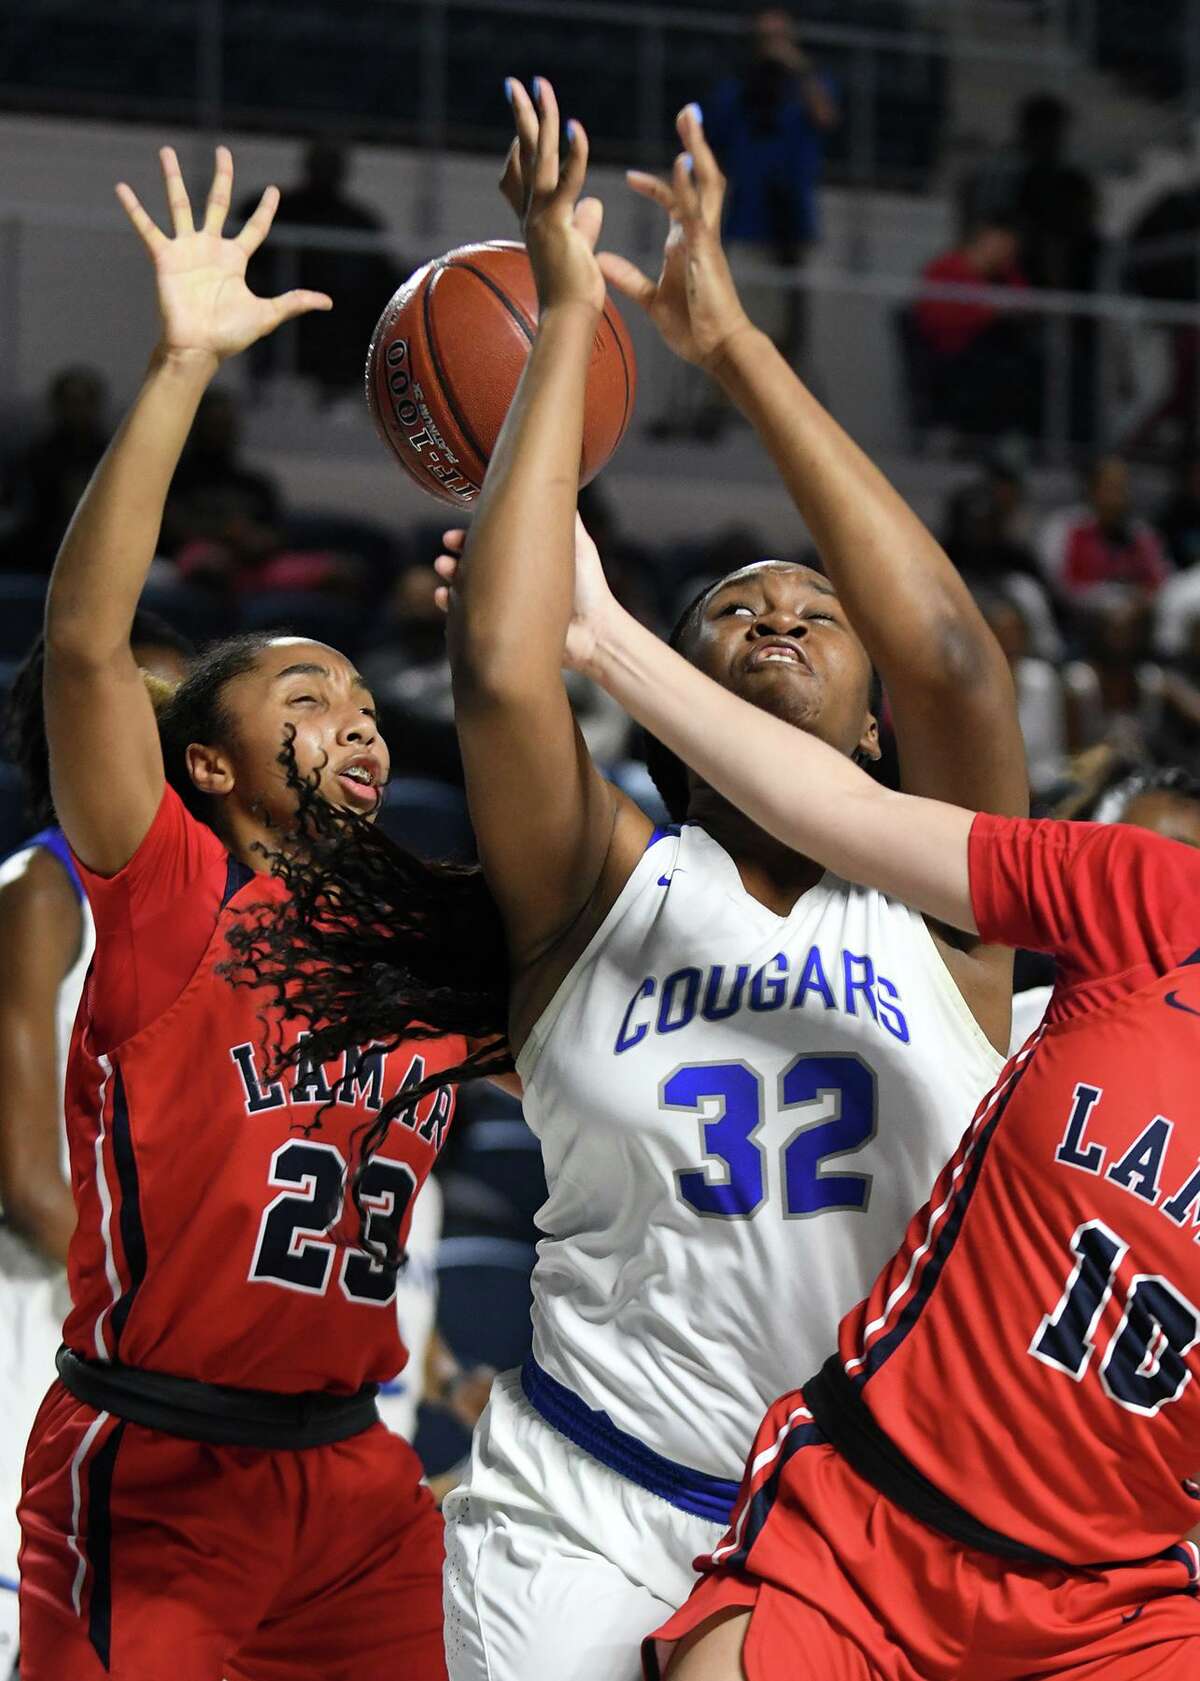 Cy Creek junior center Taylor Jackson (32) battles for a rebound against Lamar's Shani Darkins (23) and Halie Basquine (10) during the 2nd quarter of their Region III-6A UIL Girls Basketball Bi-District playoff matchup at Delmar Fieldhouse in Houston on Feb. 17, 2020